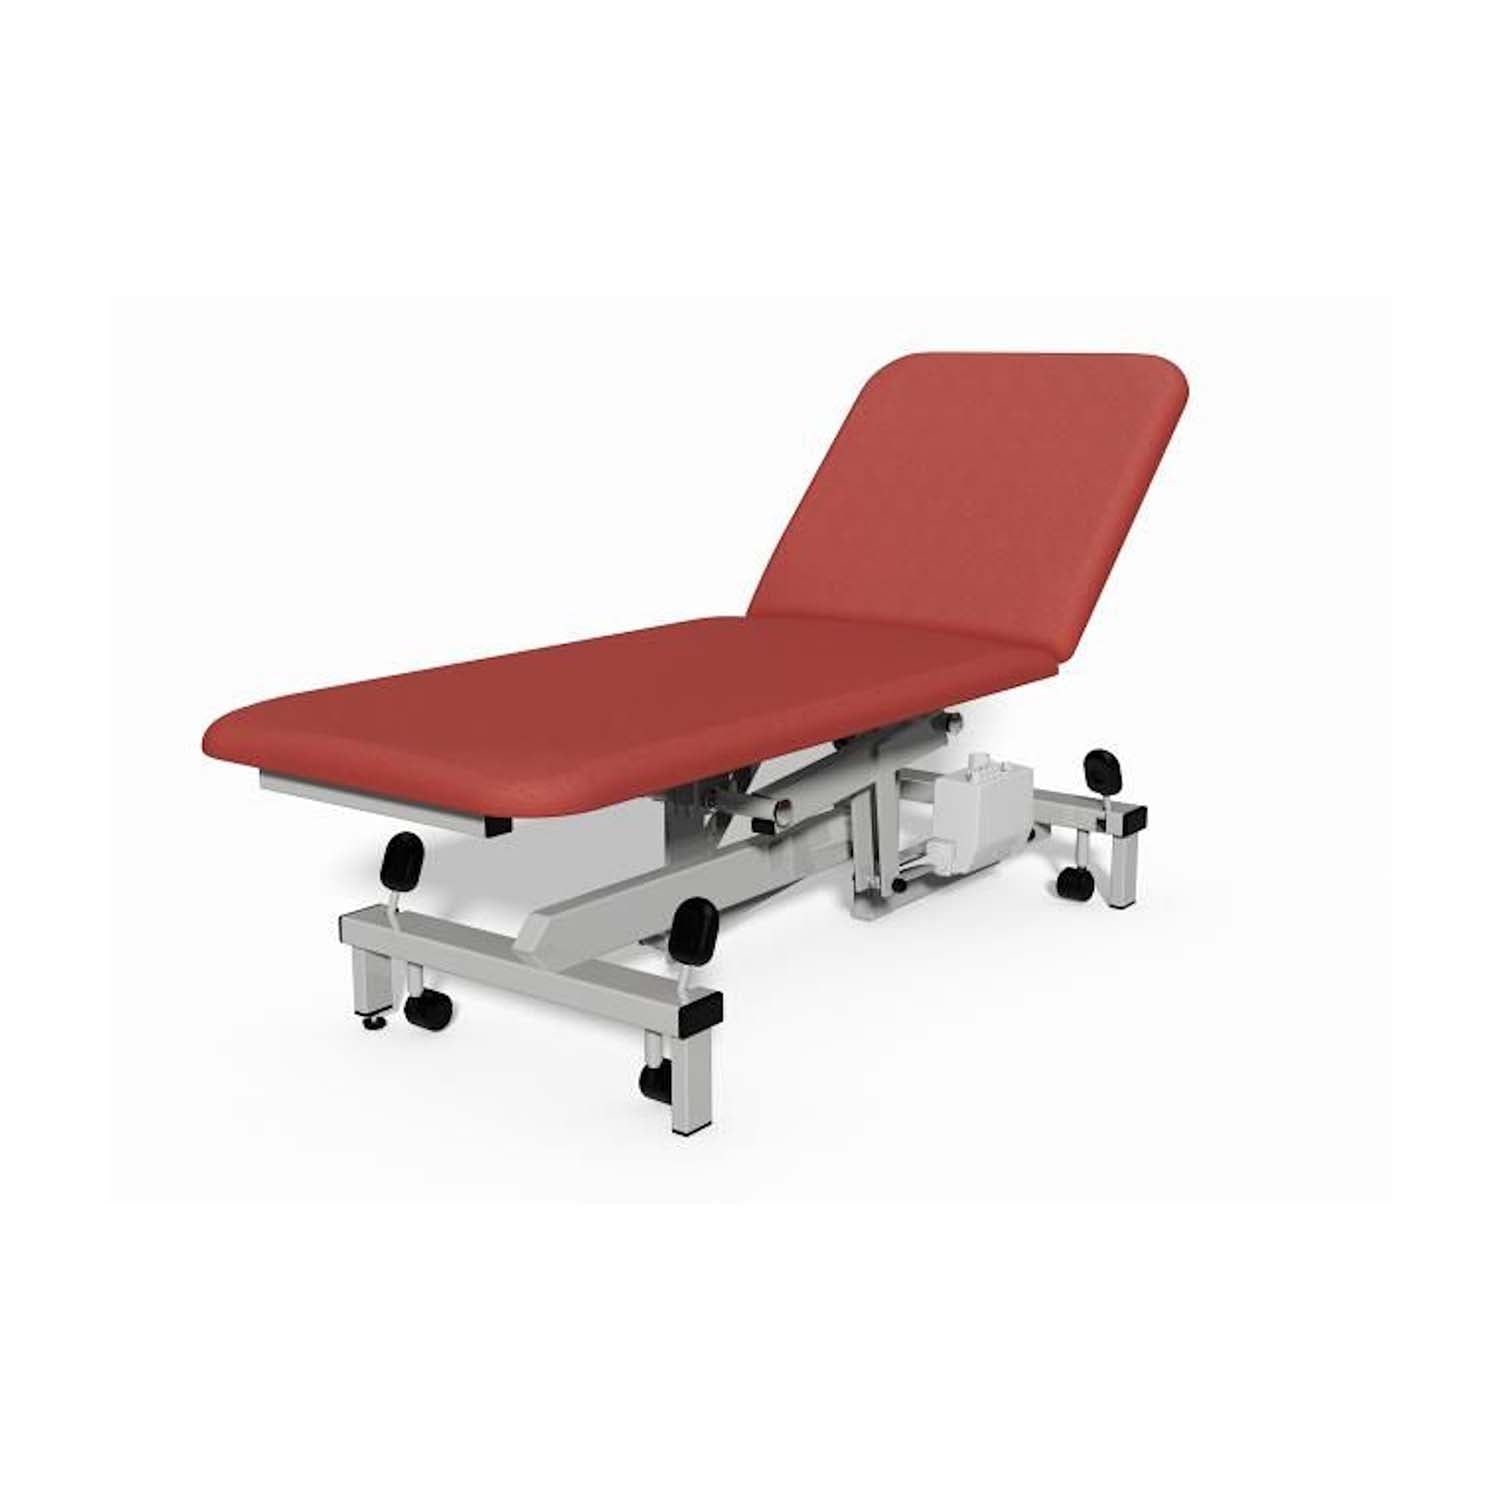 Plinth 2000 Model 502 Examination Couch | Hydraulic | Gingersnap